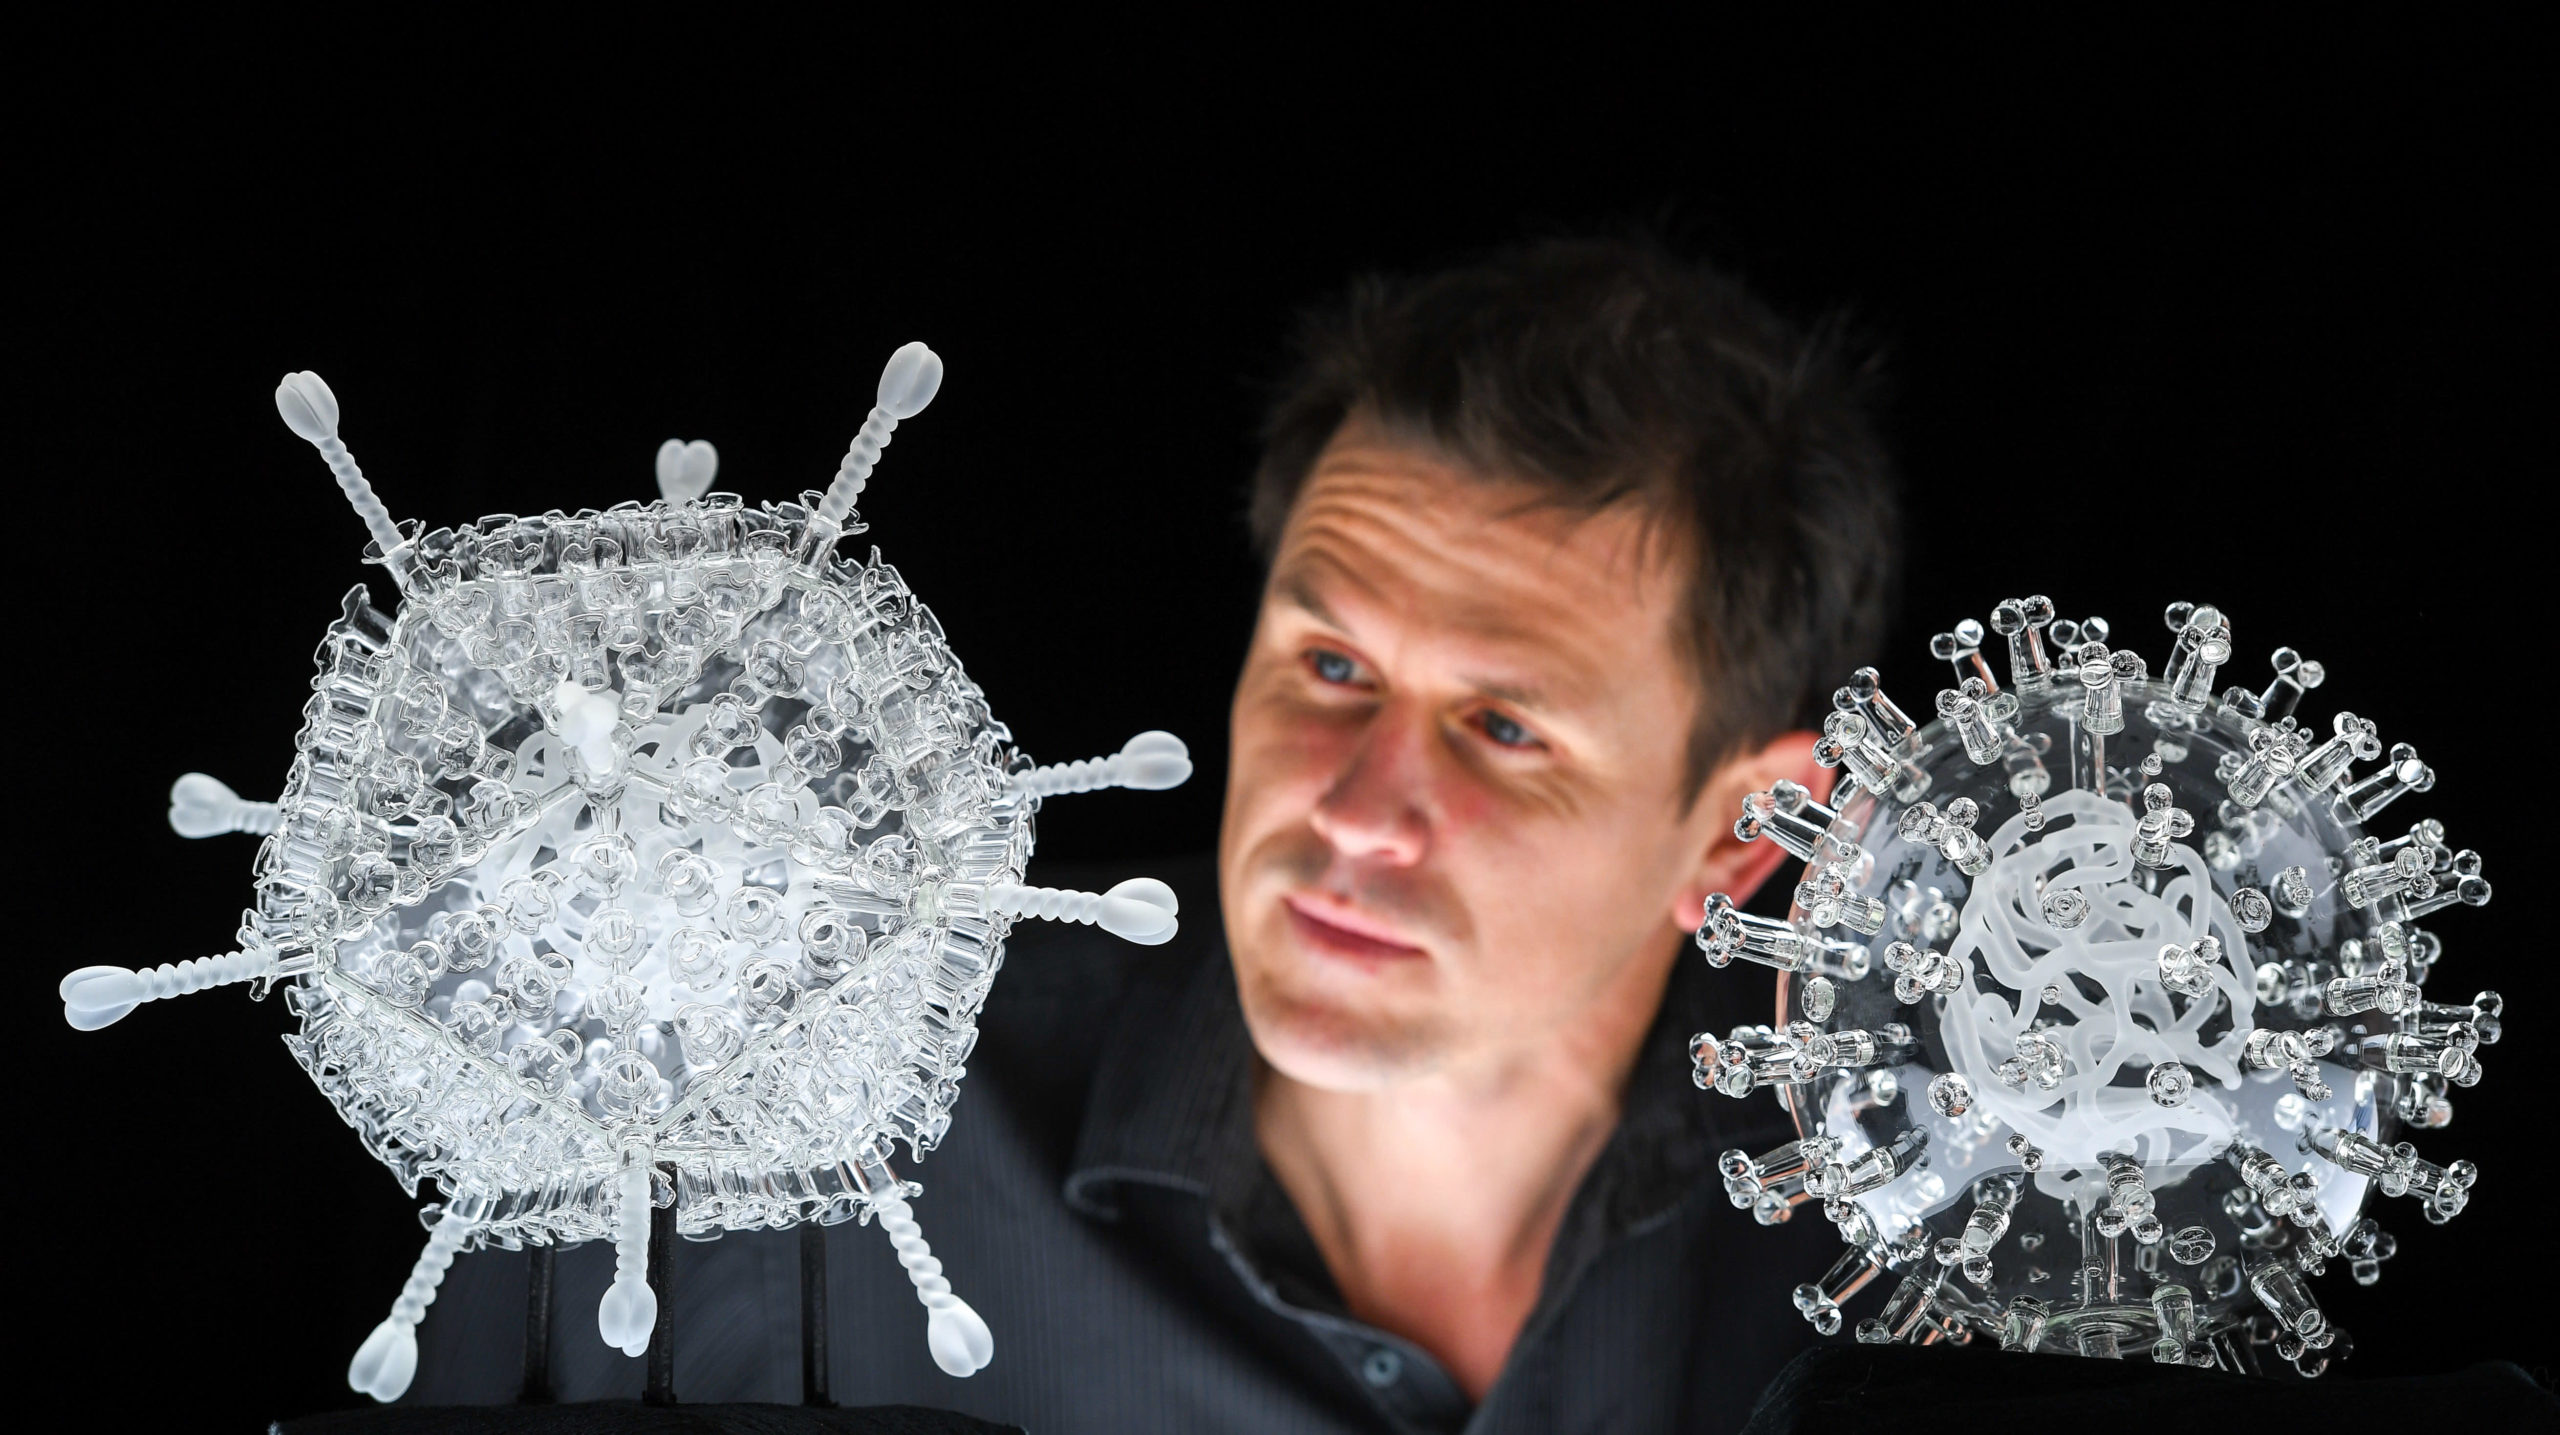 Artist Luke Jerram with his glass sculpture of the Oxford-AstraZeneca coronavirus vaccine, left, alongside his earlier work of the virus itself, in glass at the Paintworks on February 05, 2021 in Bristol, England. (Photo: Finnbarr Webster, Getty Images)